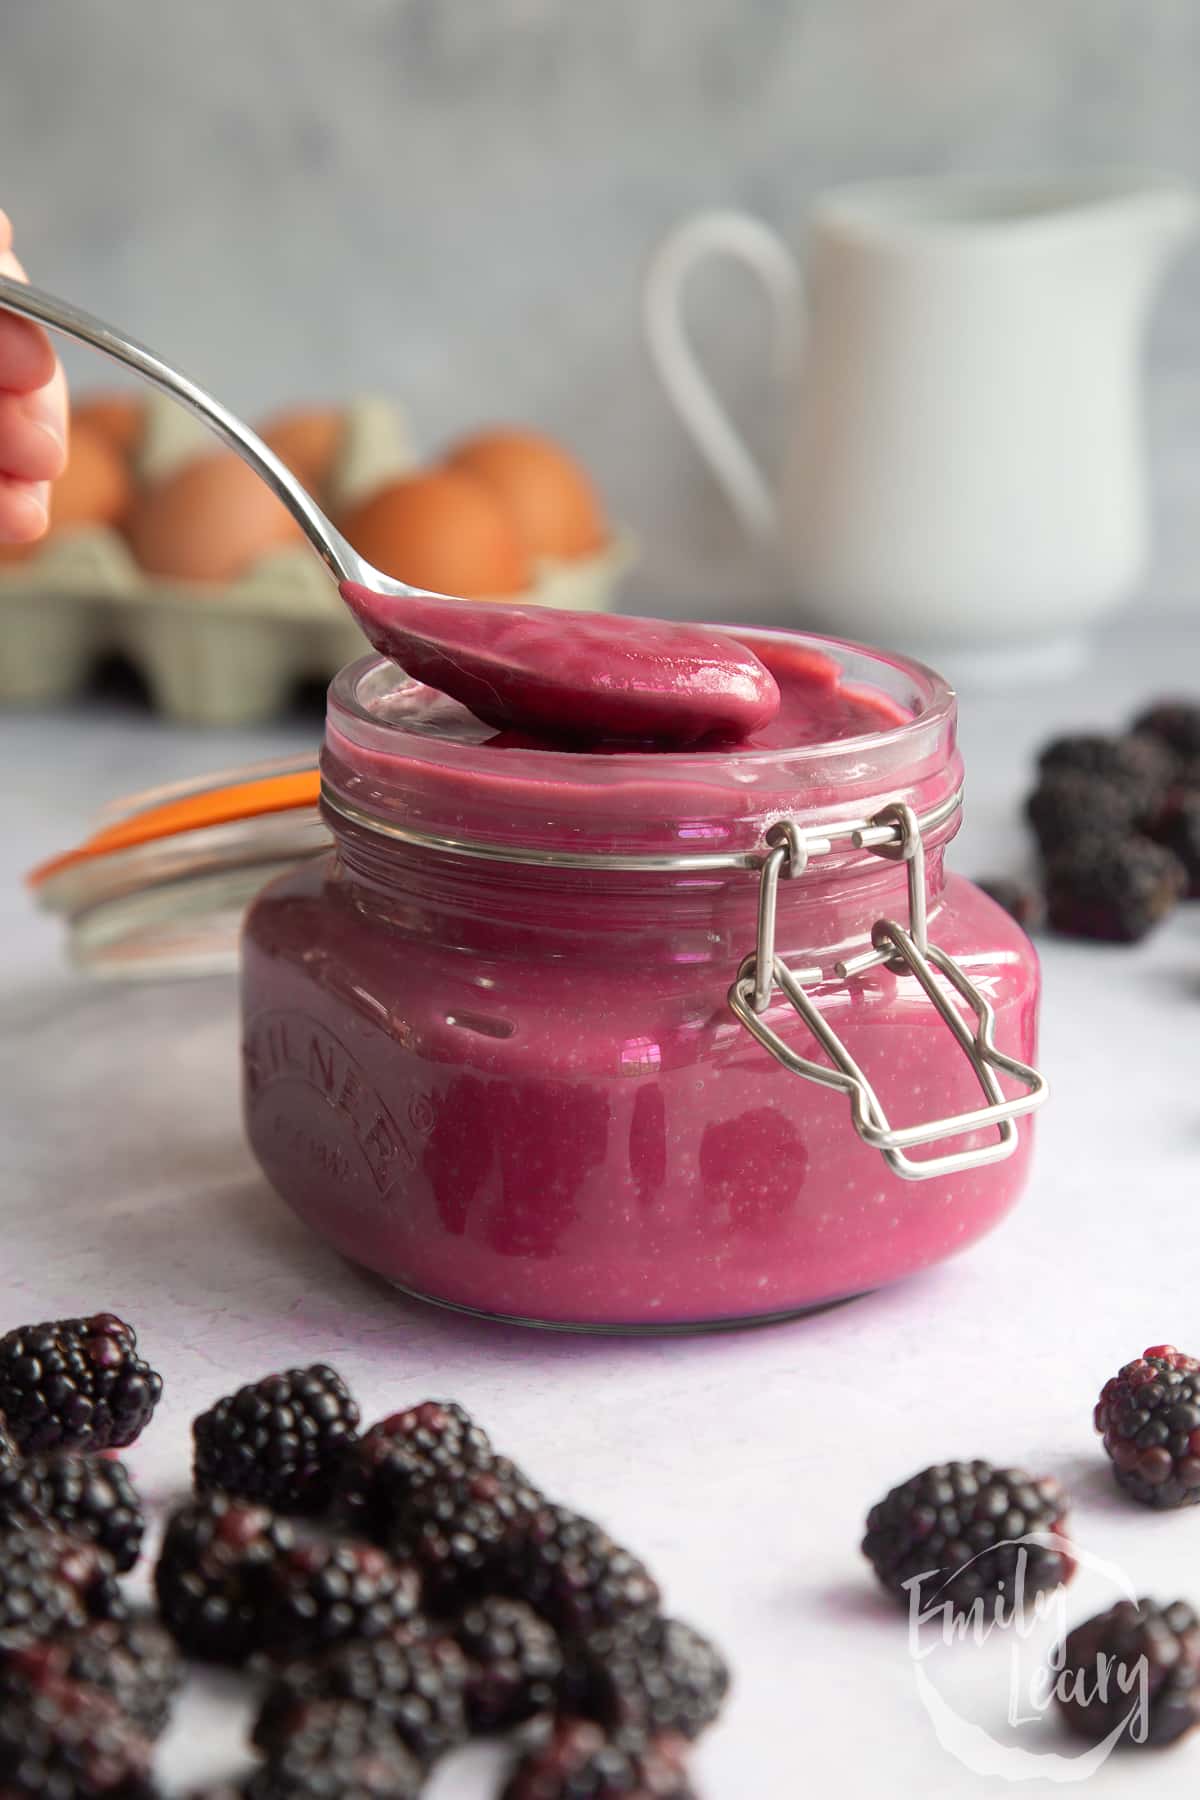 a silver spoon full of blackberry curd at the top of a jar full of blackberry curd.